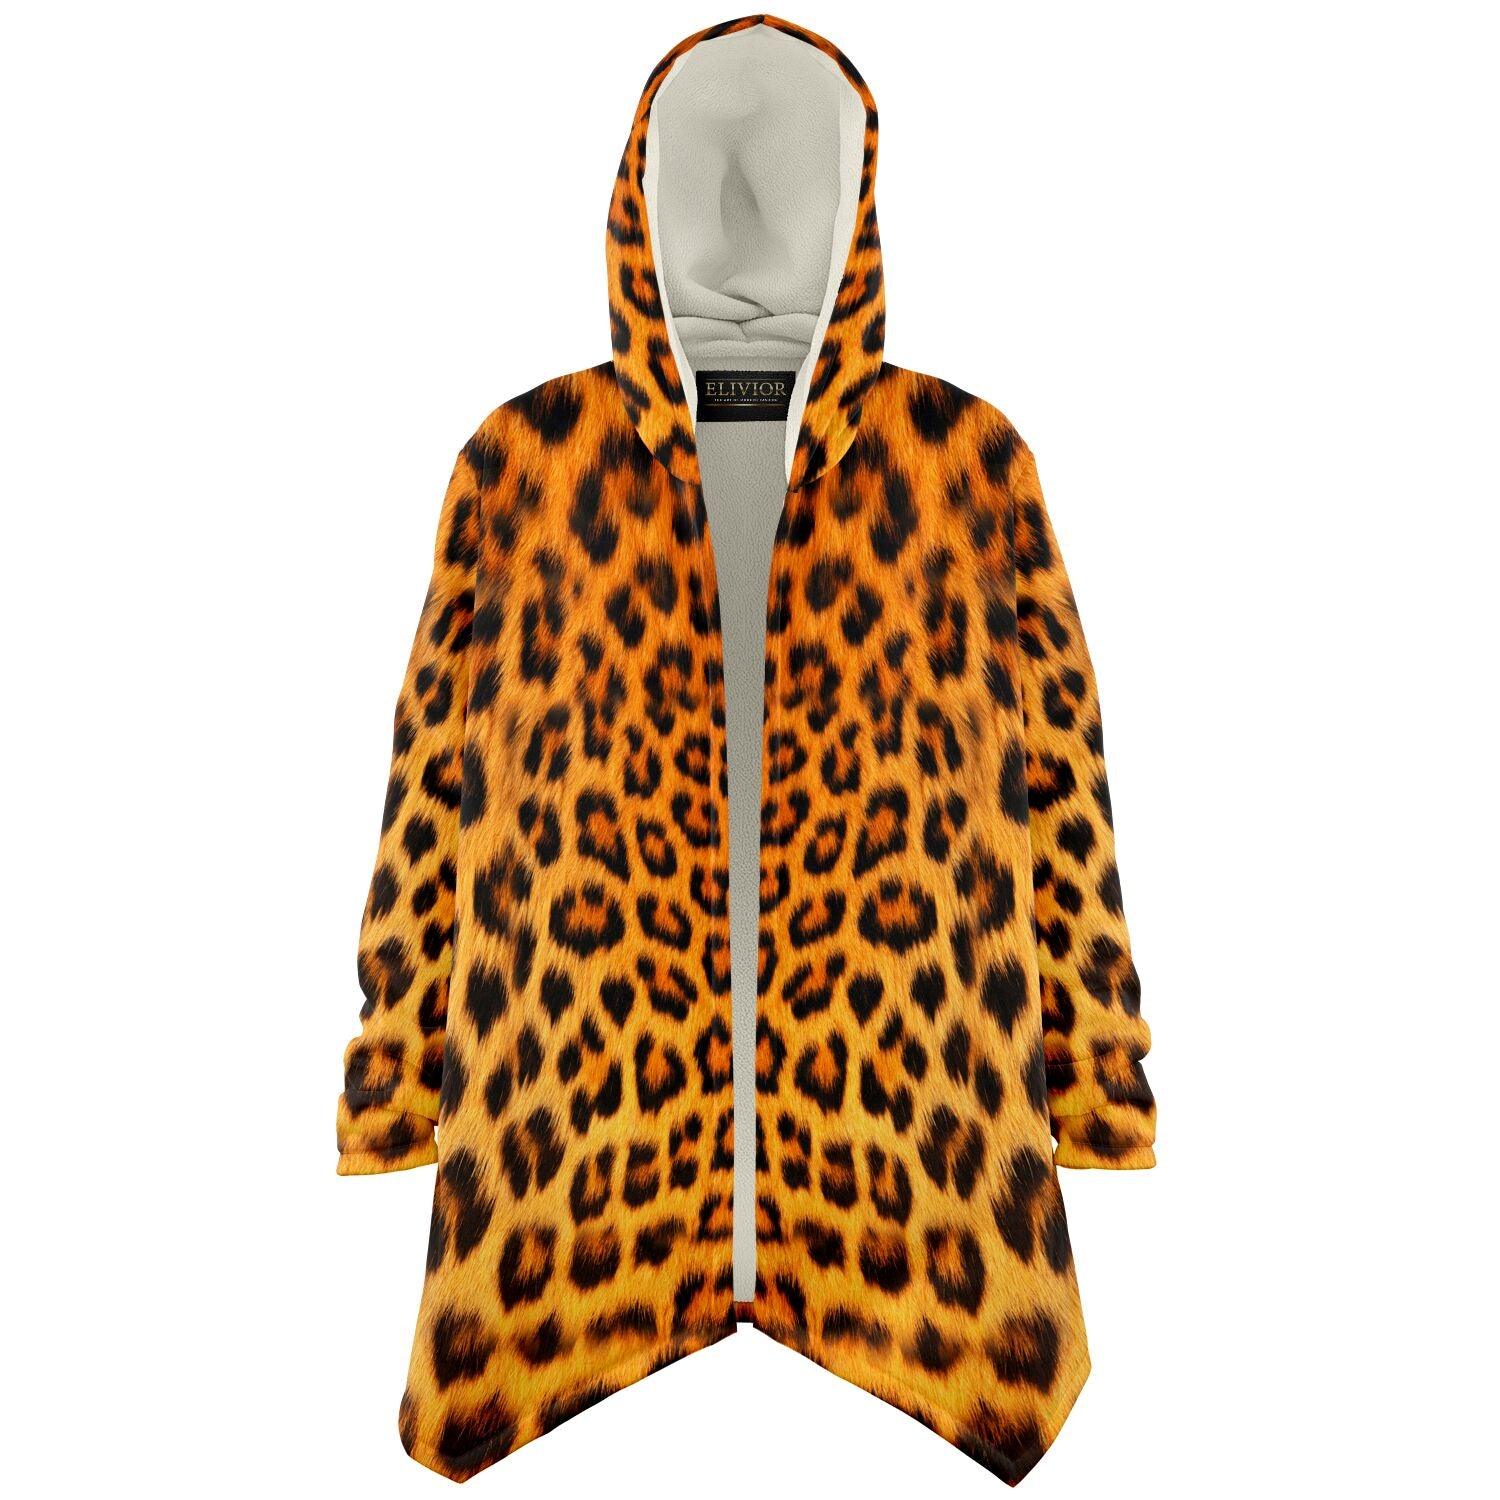 Luxurious Fashionable Leopard Print Cloak with Hood - ELIVIOR